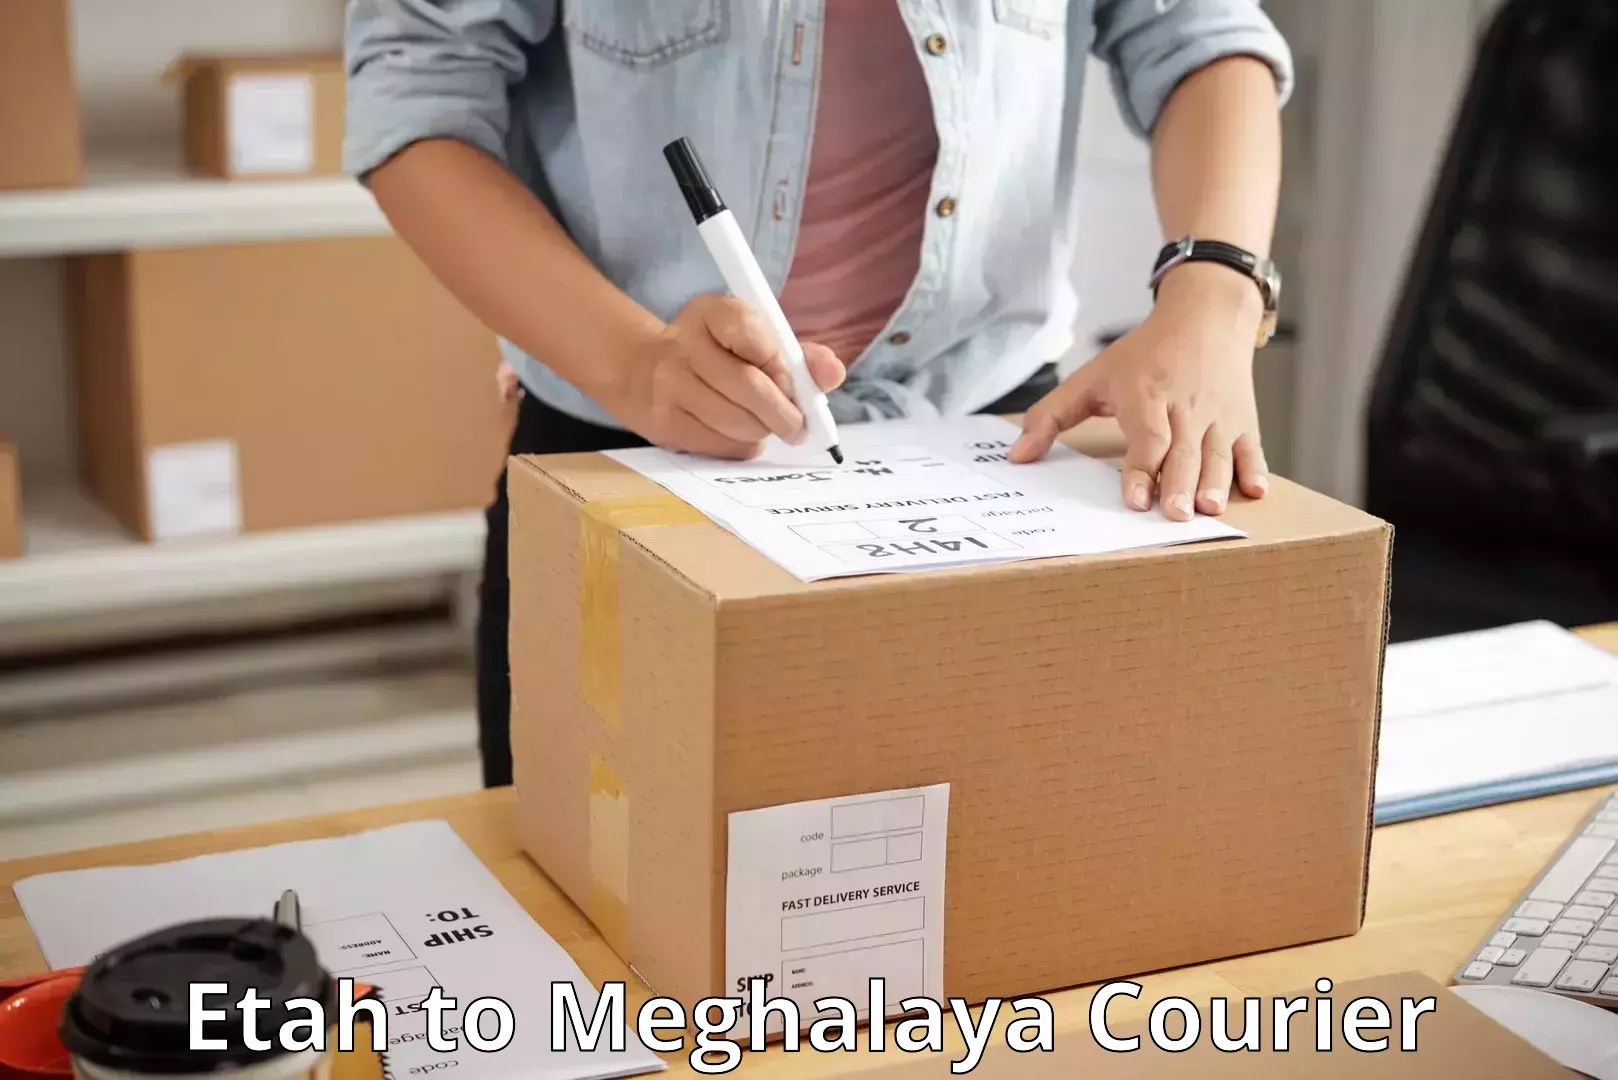 State-of-the-art courier technology Etah to Shillong